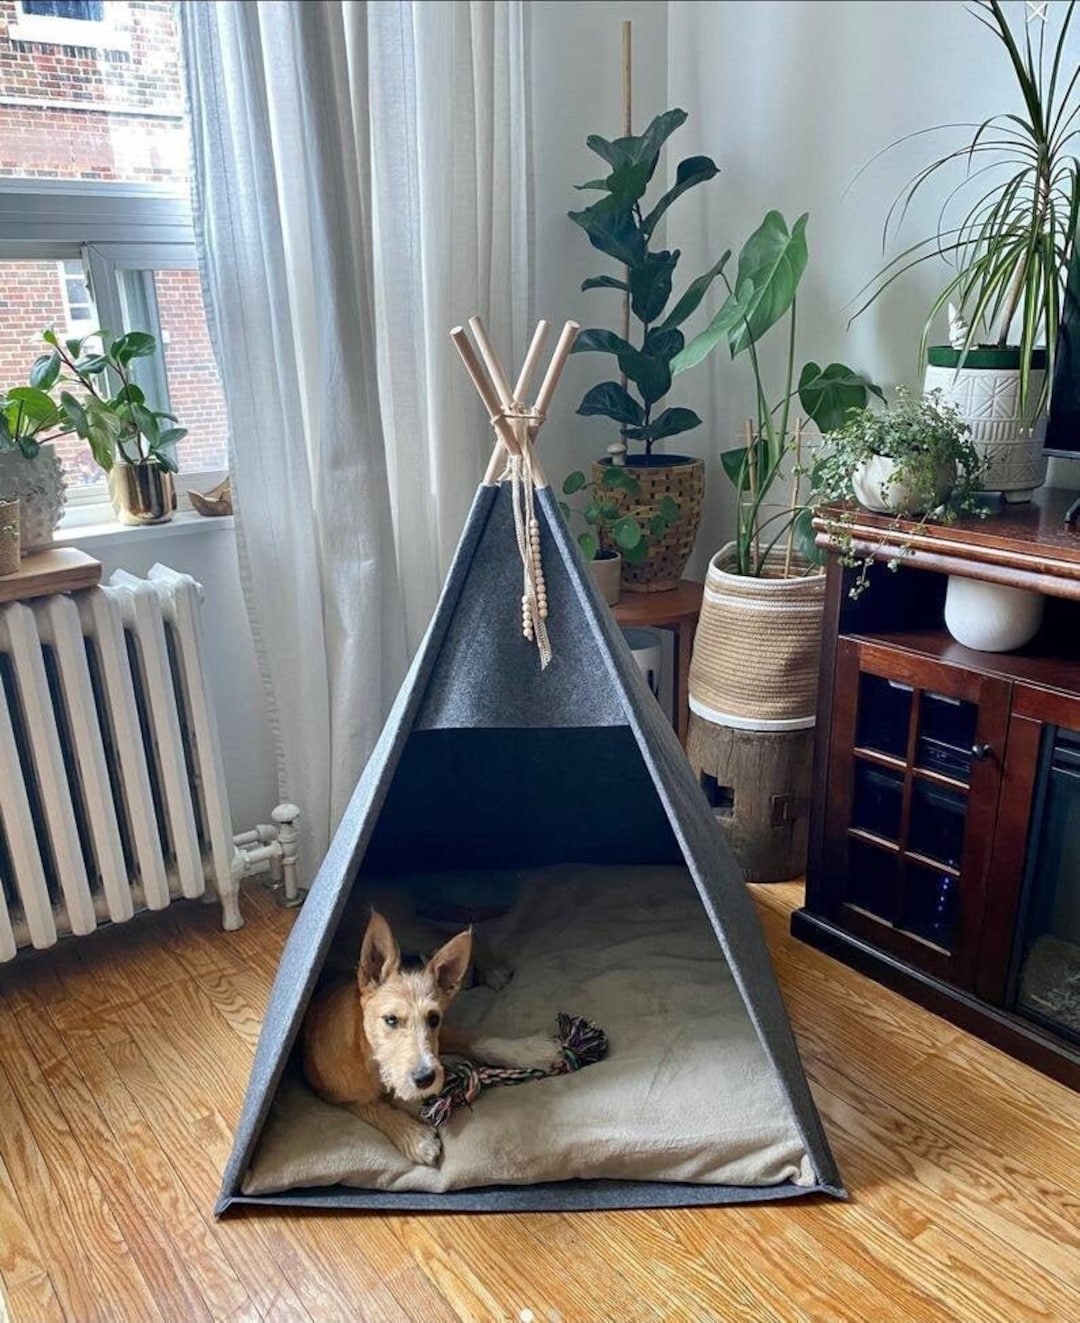 Dog Bed Large Dogs Tent Personalized Teepee Pet Husky Dogs